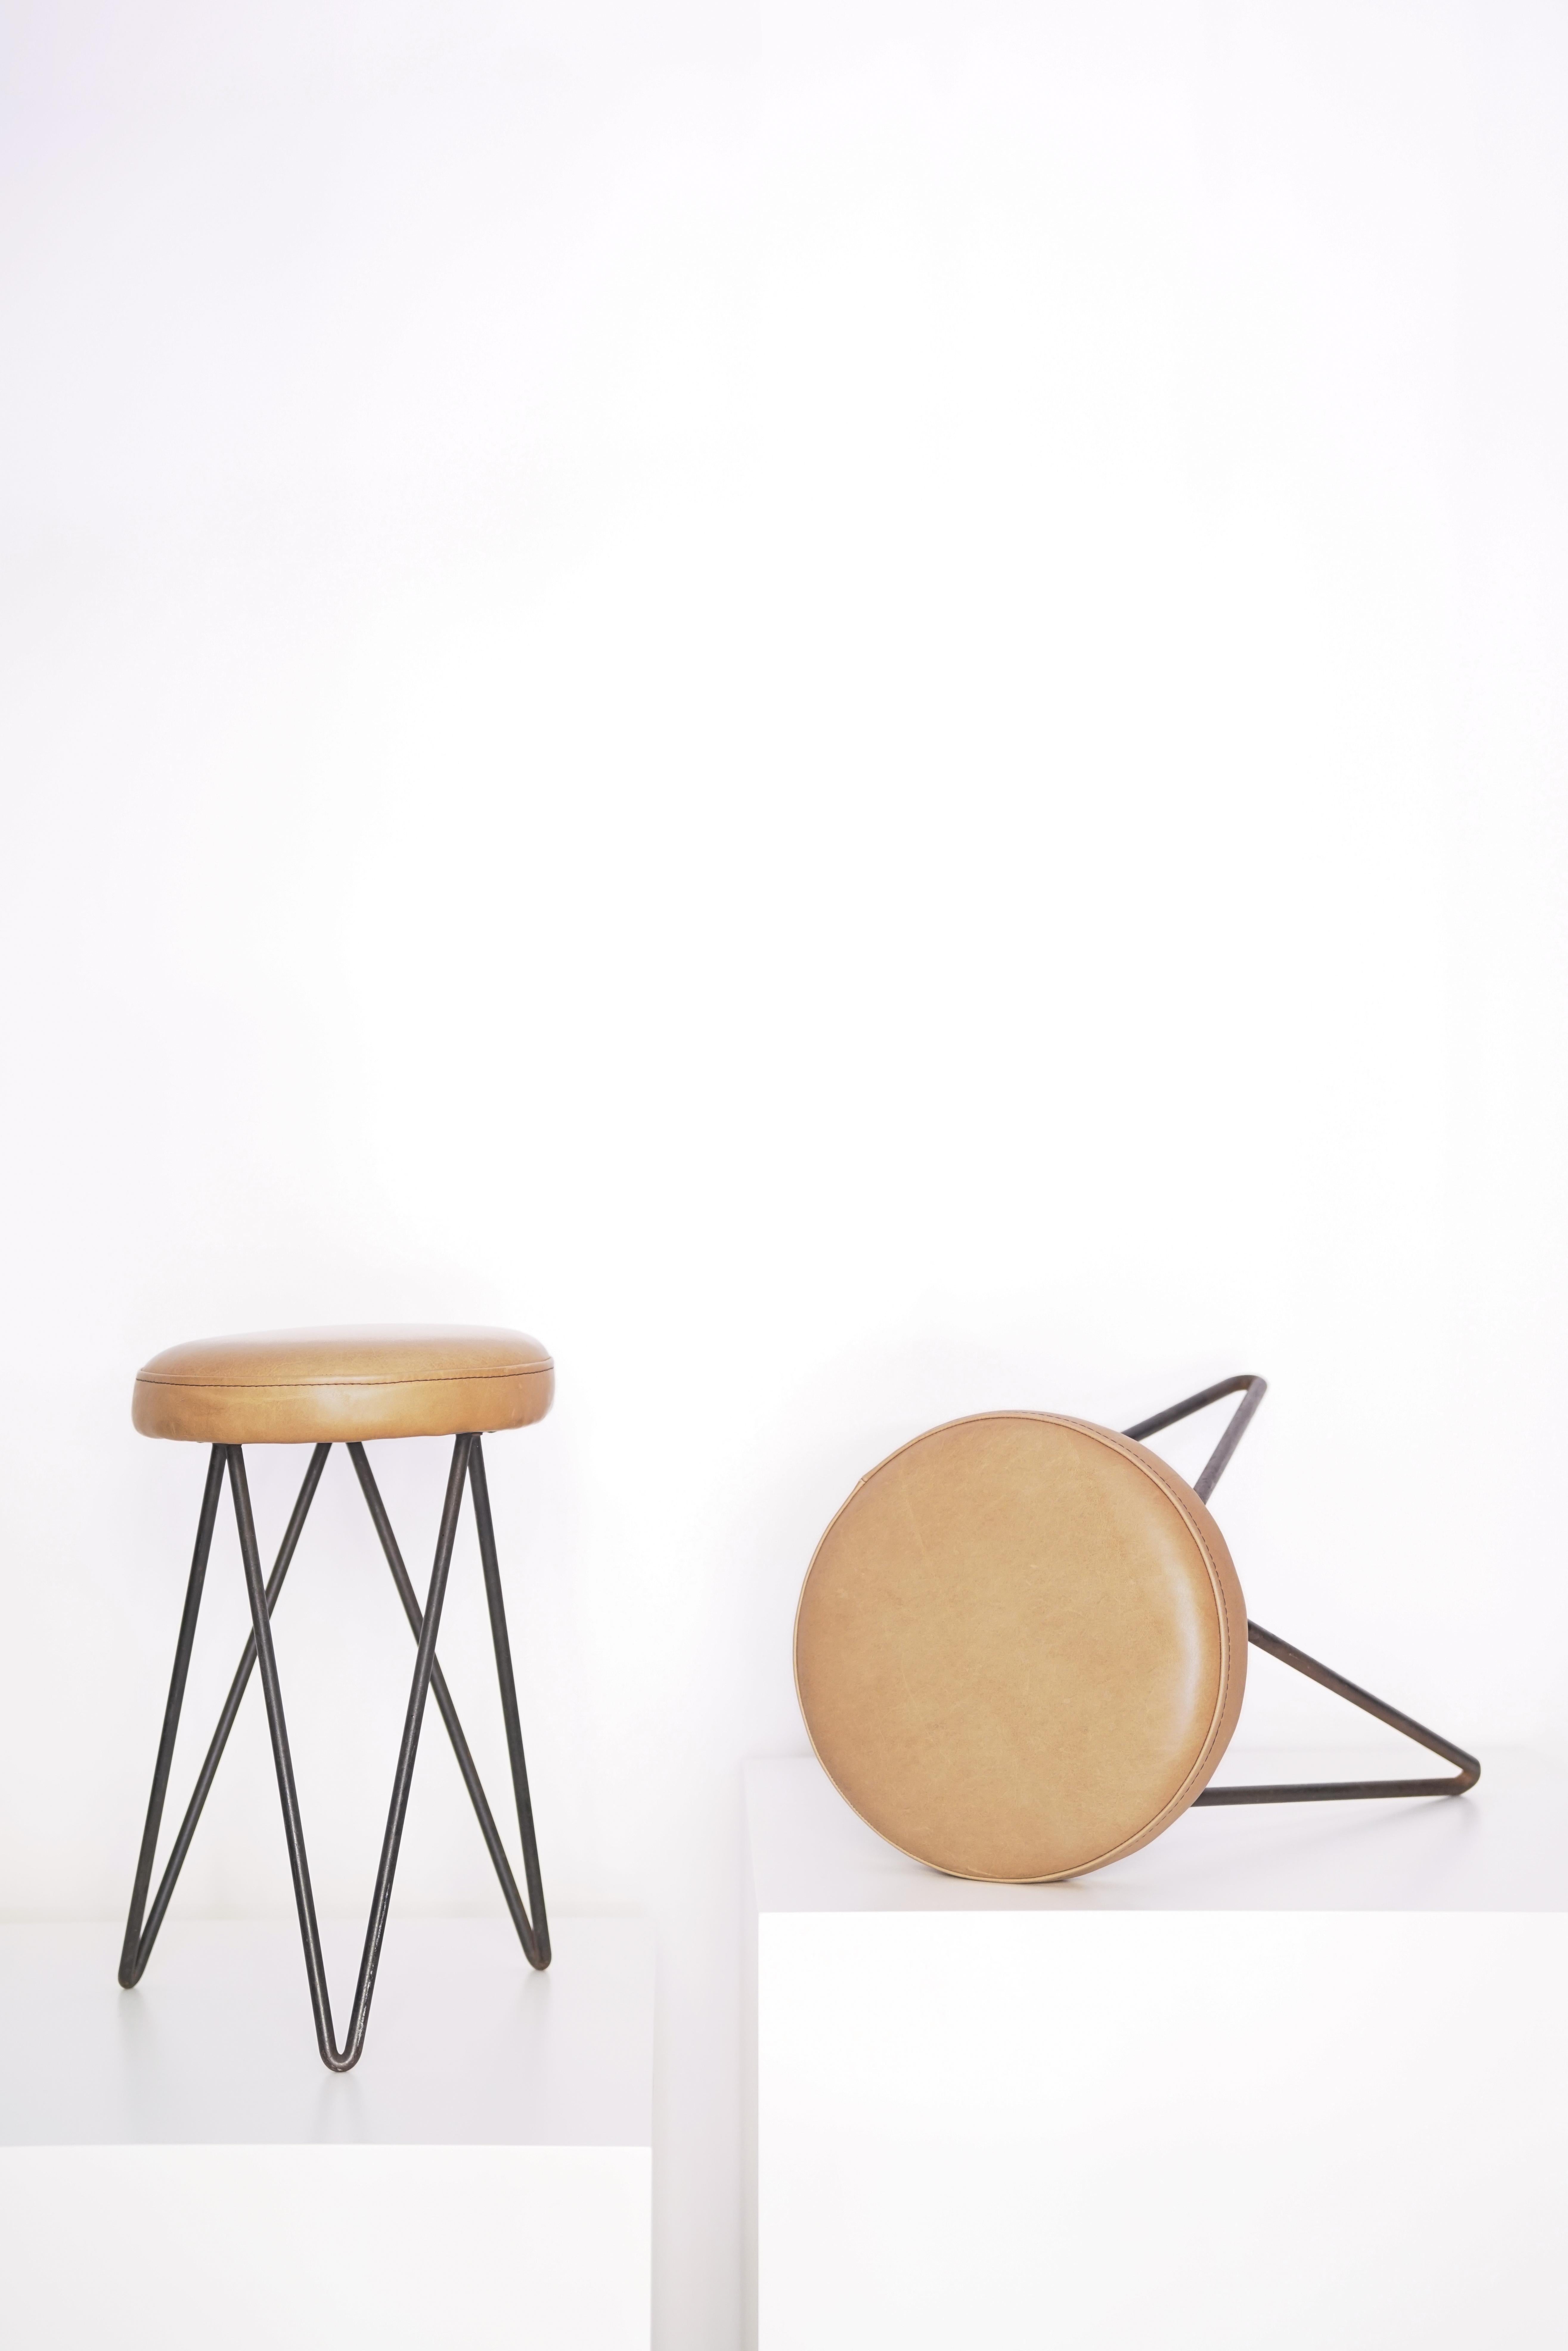 Pair of french leather stools, 1960s, designed by Pierre Guariche.

About the designer:
A visionary designer, he brought a functionalist dimension to furniture without ever forgetting the aesthetic approach. He wanted to respond to the needs of his